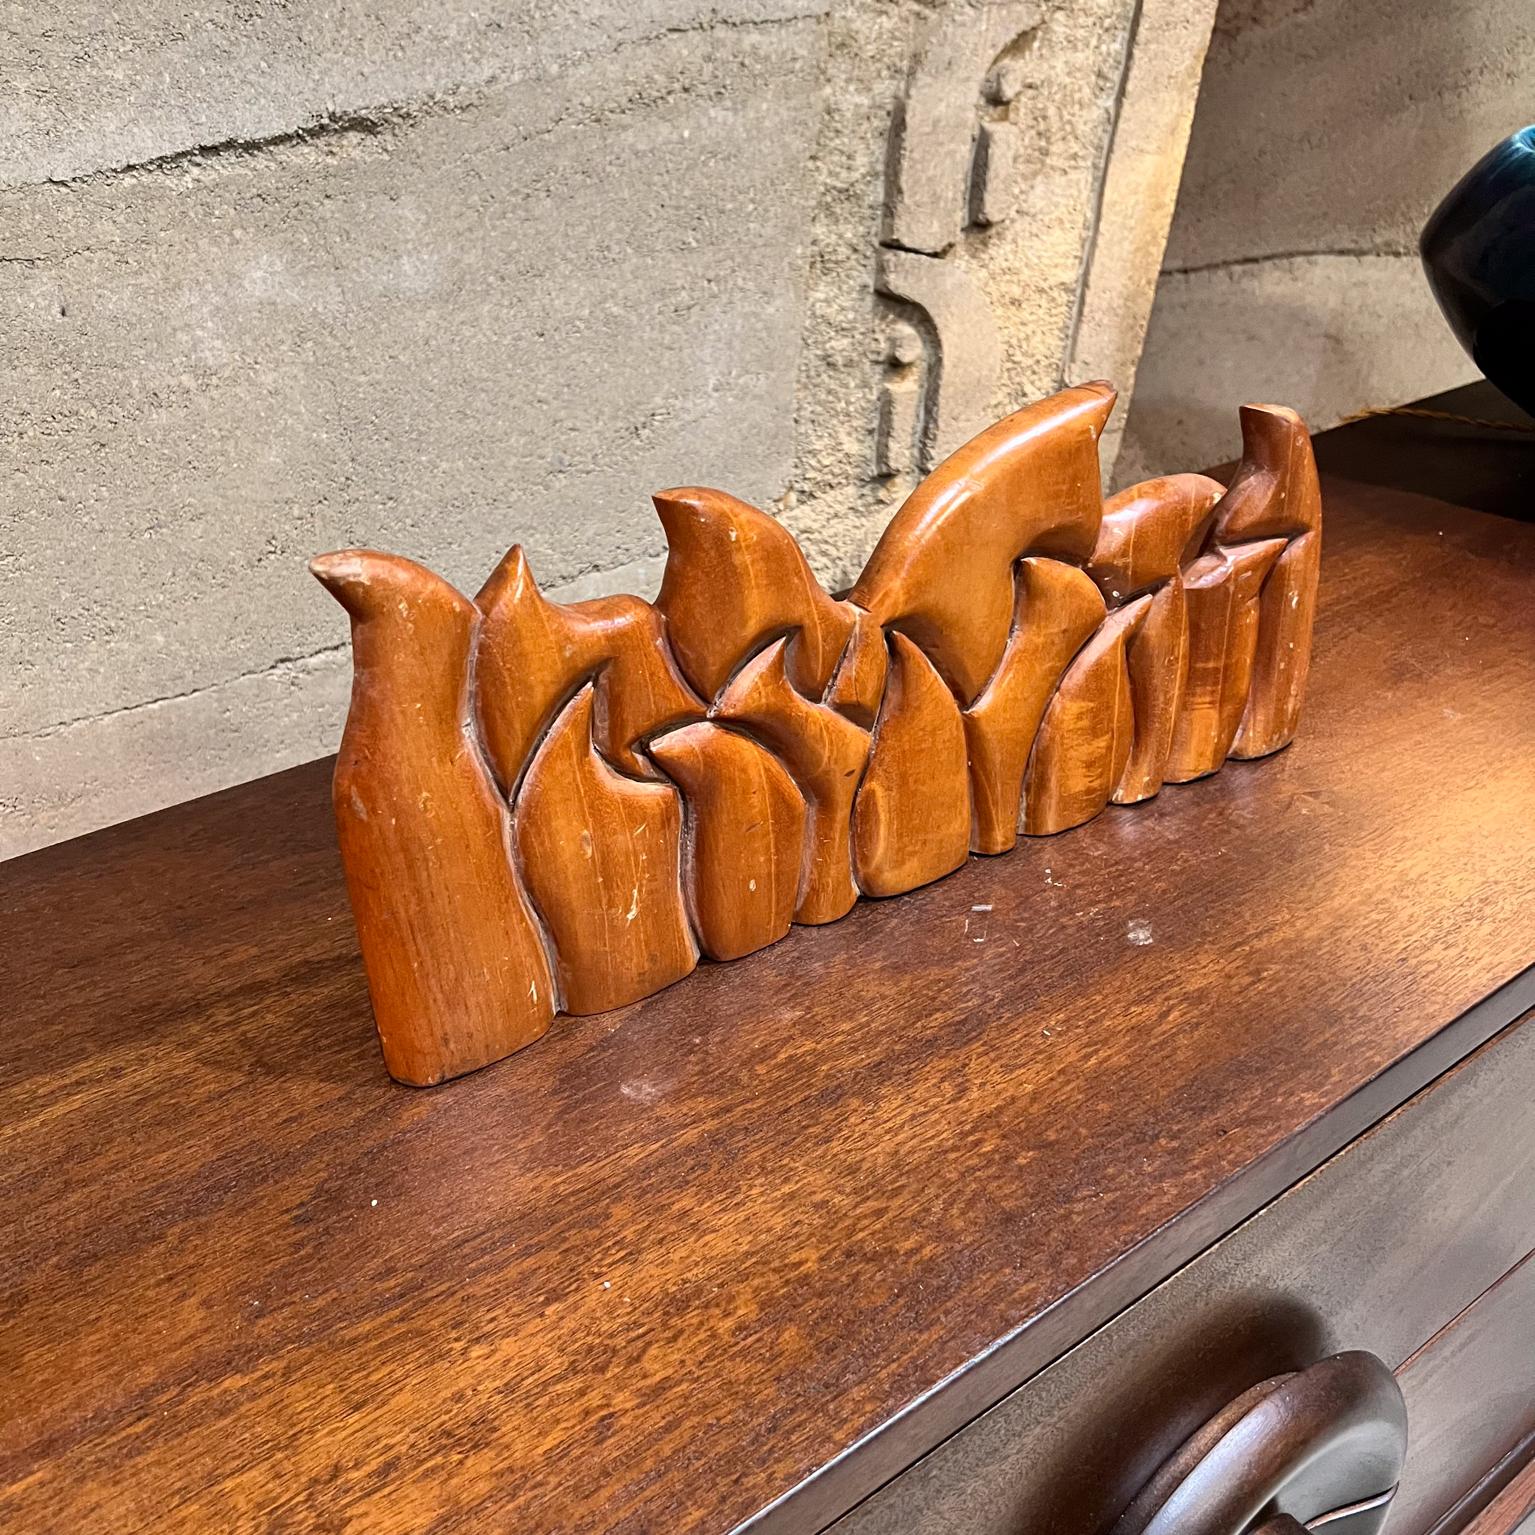 1999 Victor Rozo Last Supper Abstract Wood Sculpture Mexico DF For Sale 3